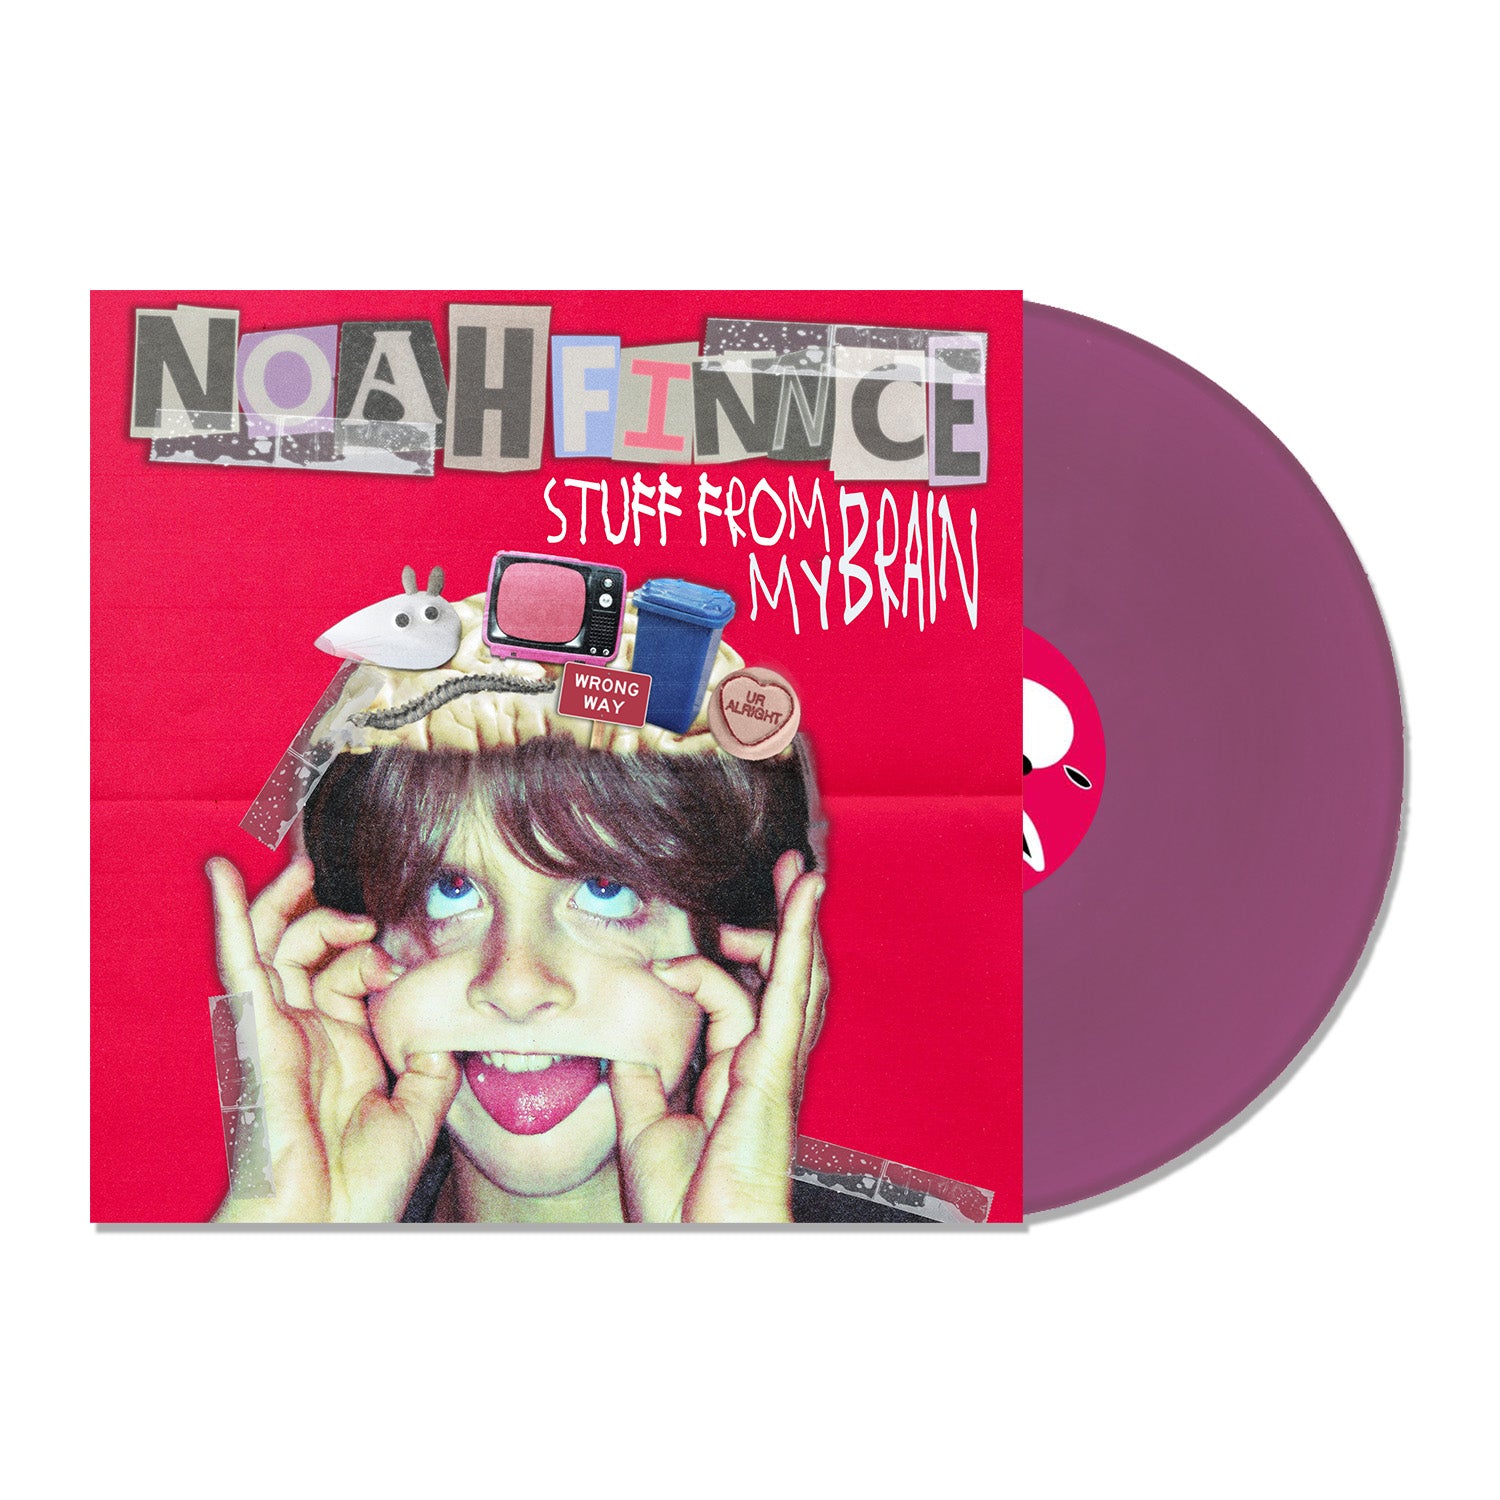 NOAHFINNCE - STUFF FROM MY BRAIN / MY BRAIN AFTER THERAPY: Limited Purple Vinyl LP